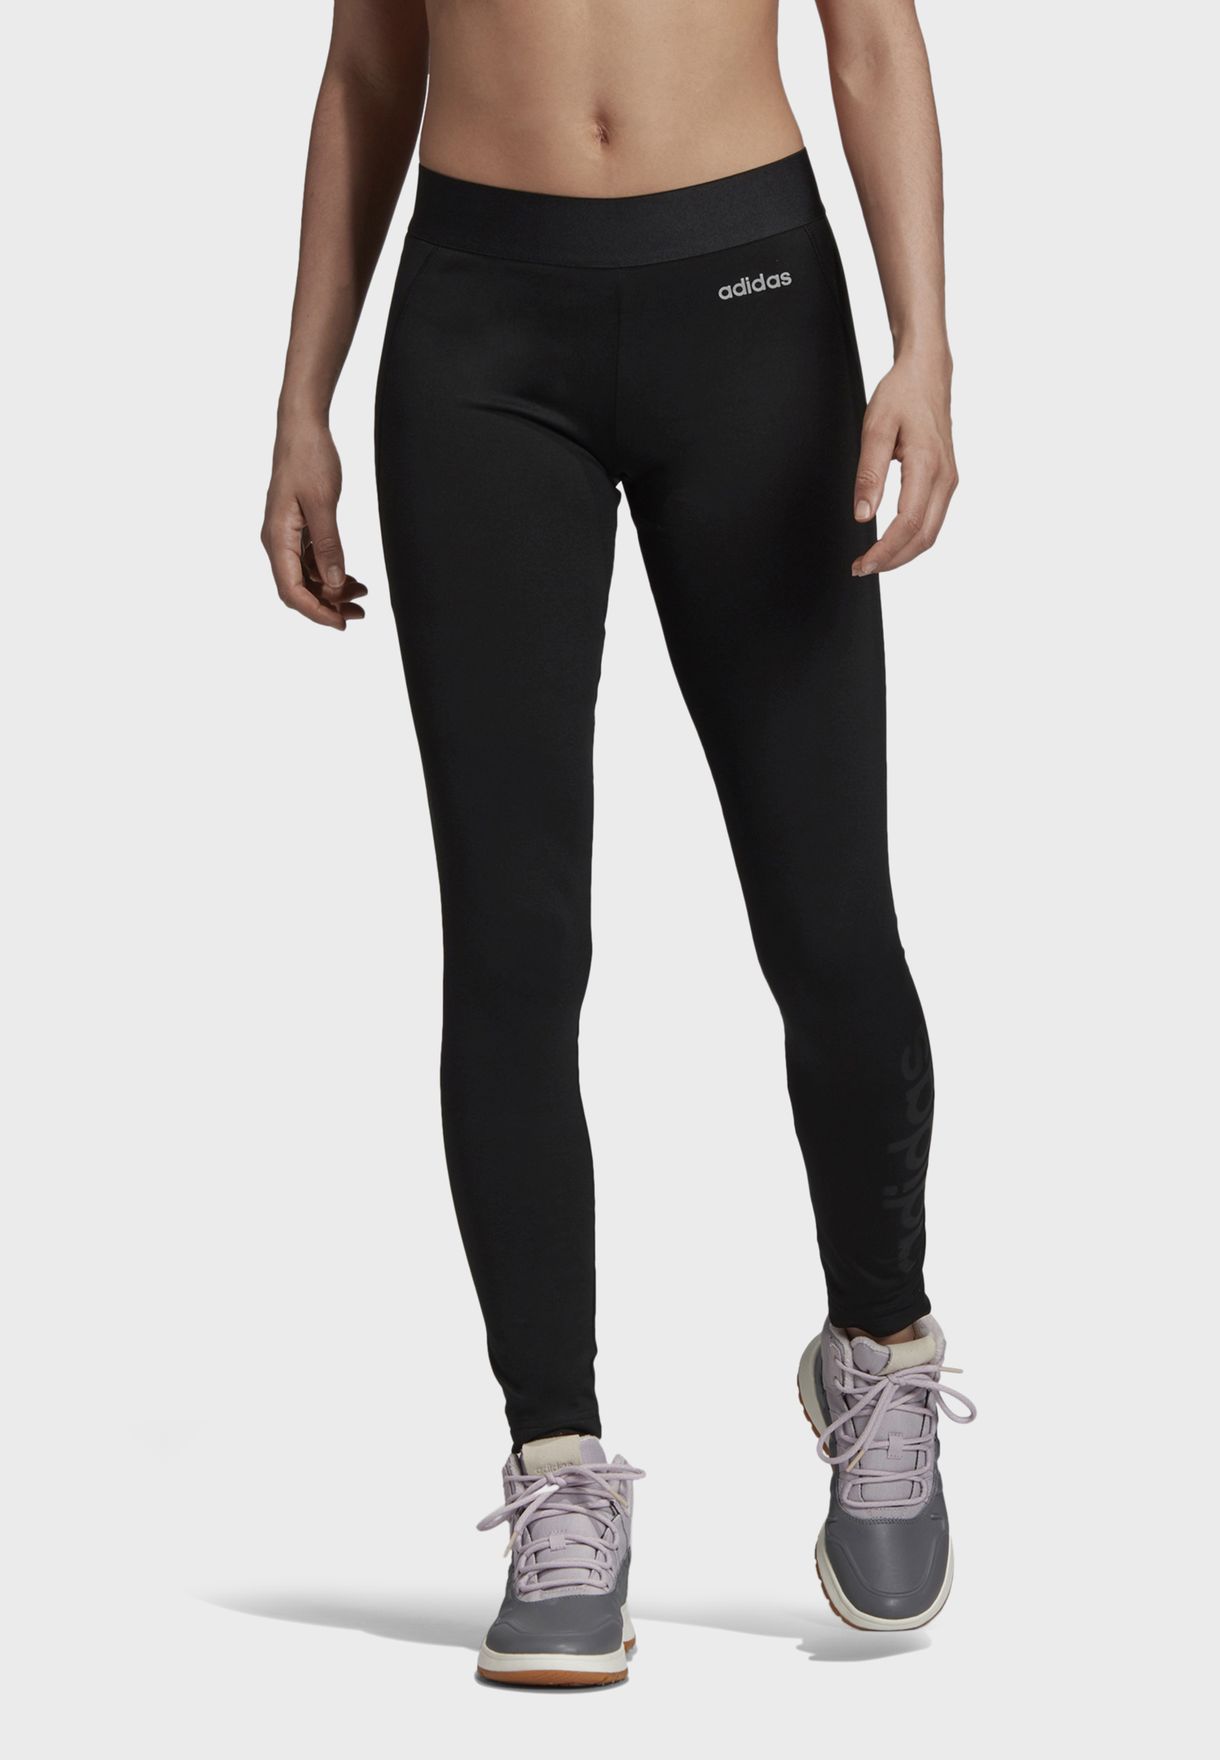 Buy adidas black Climawarm Tights for 